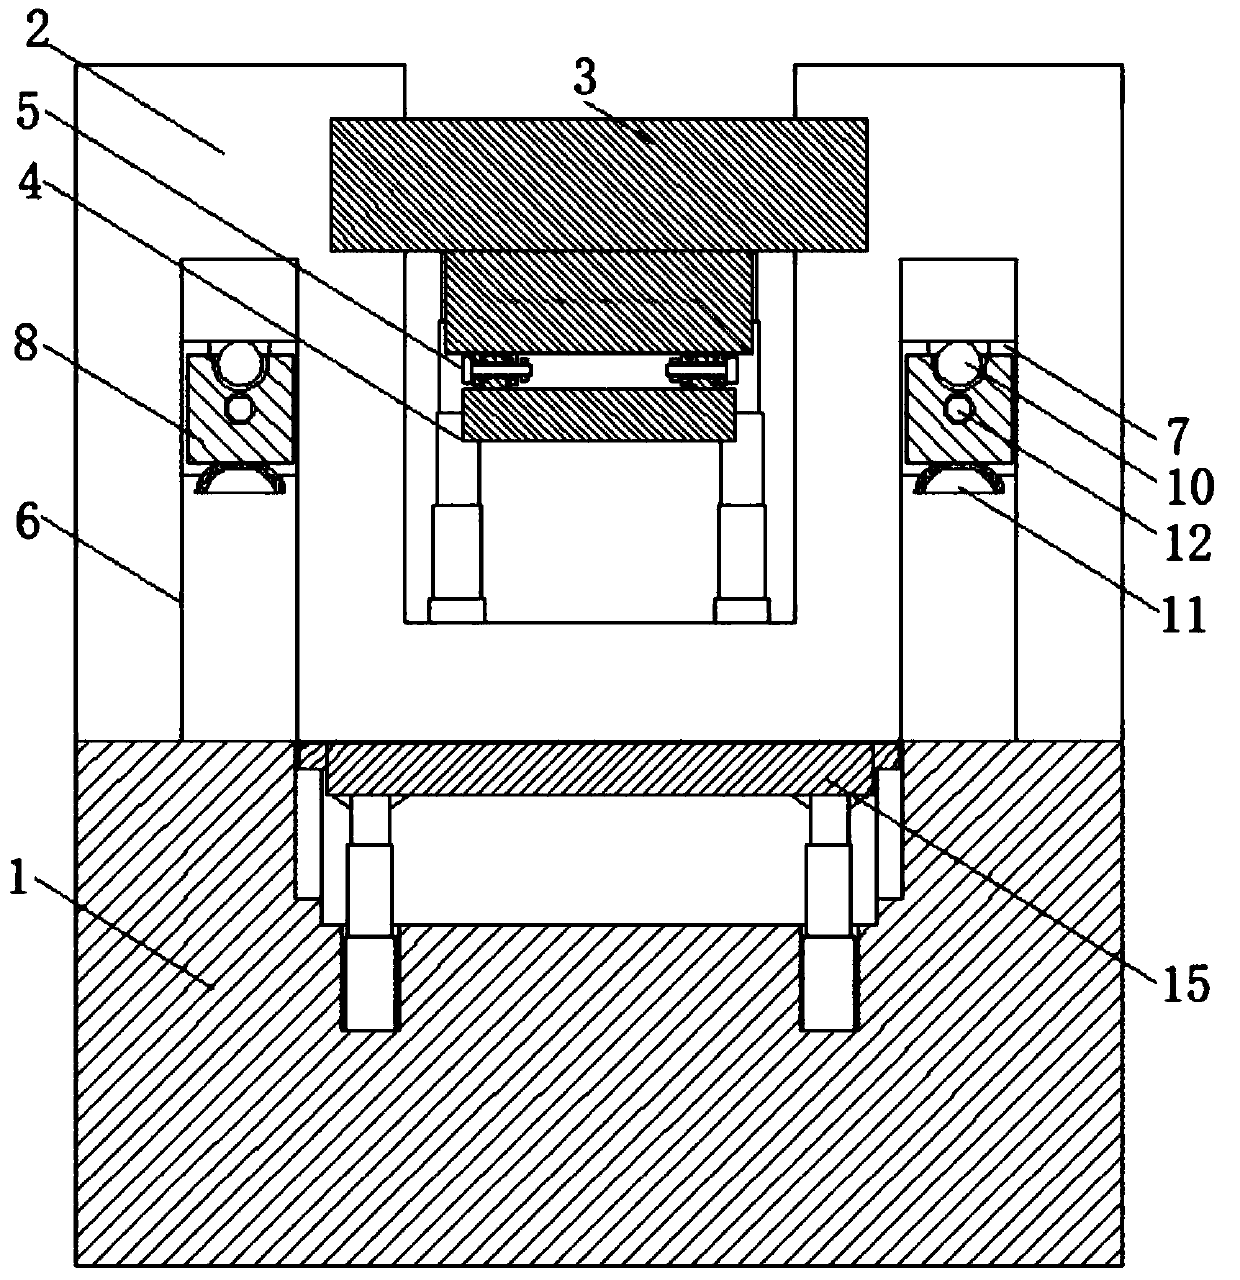 Aluminum-plastic plate punch forming device